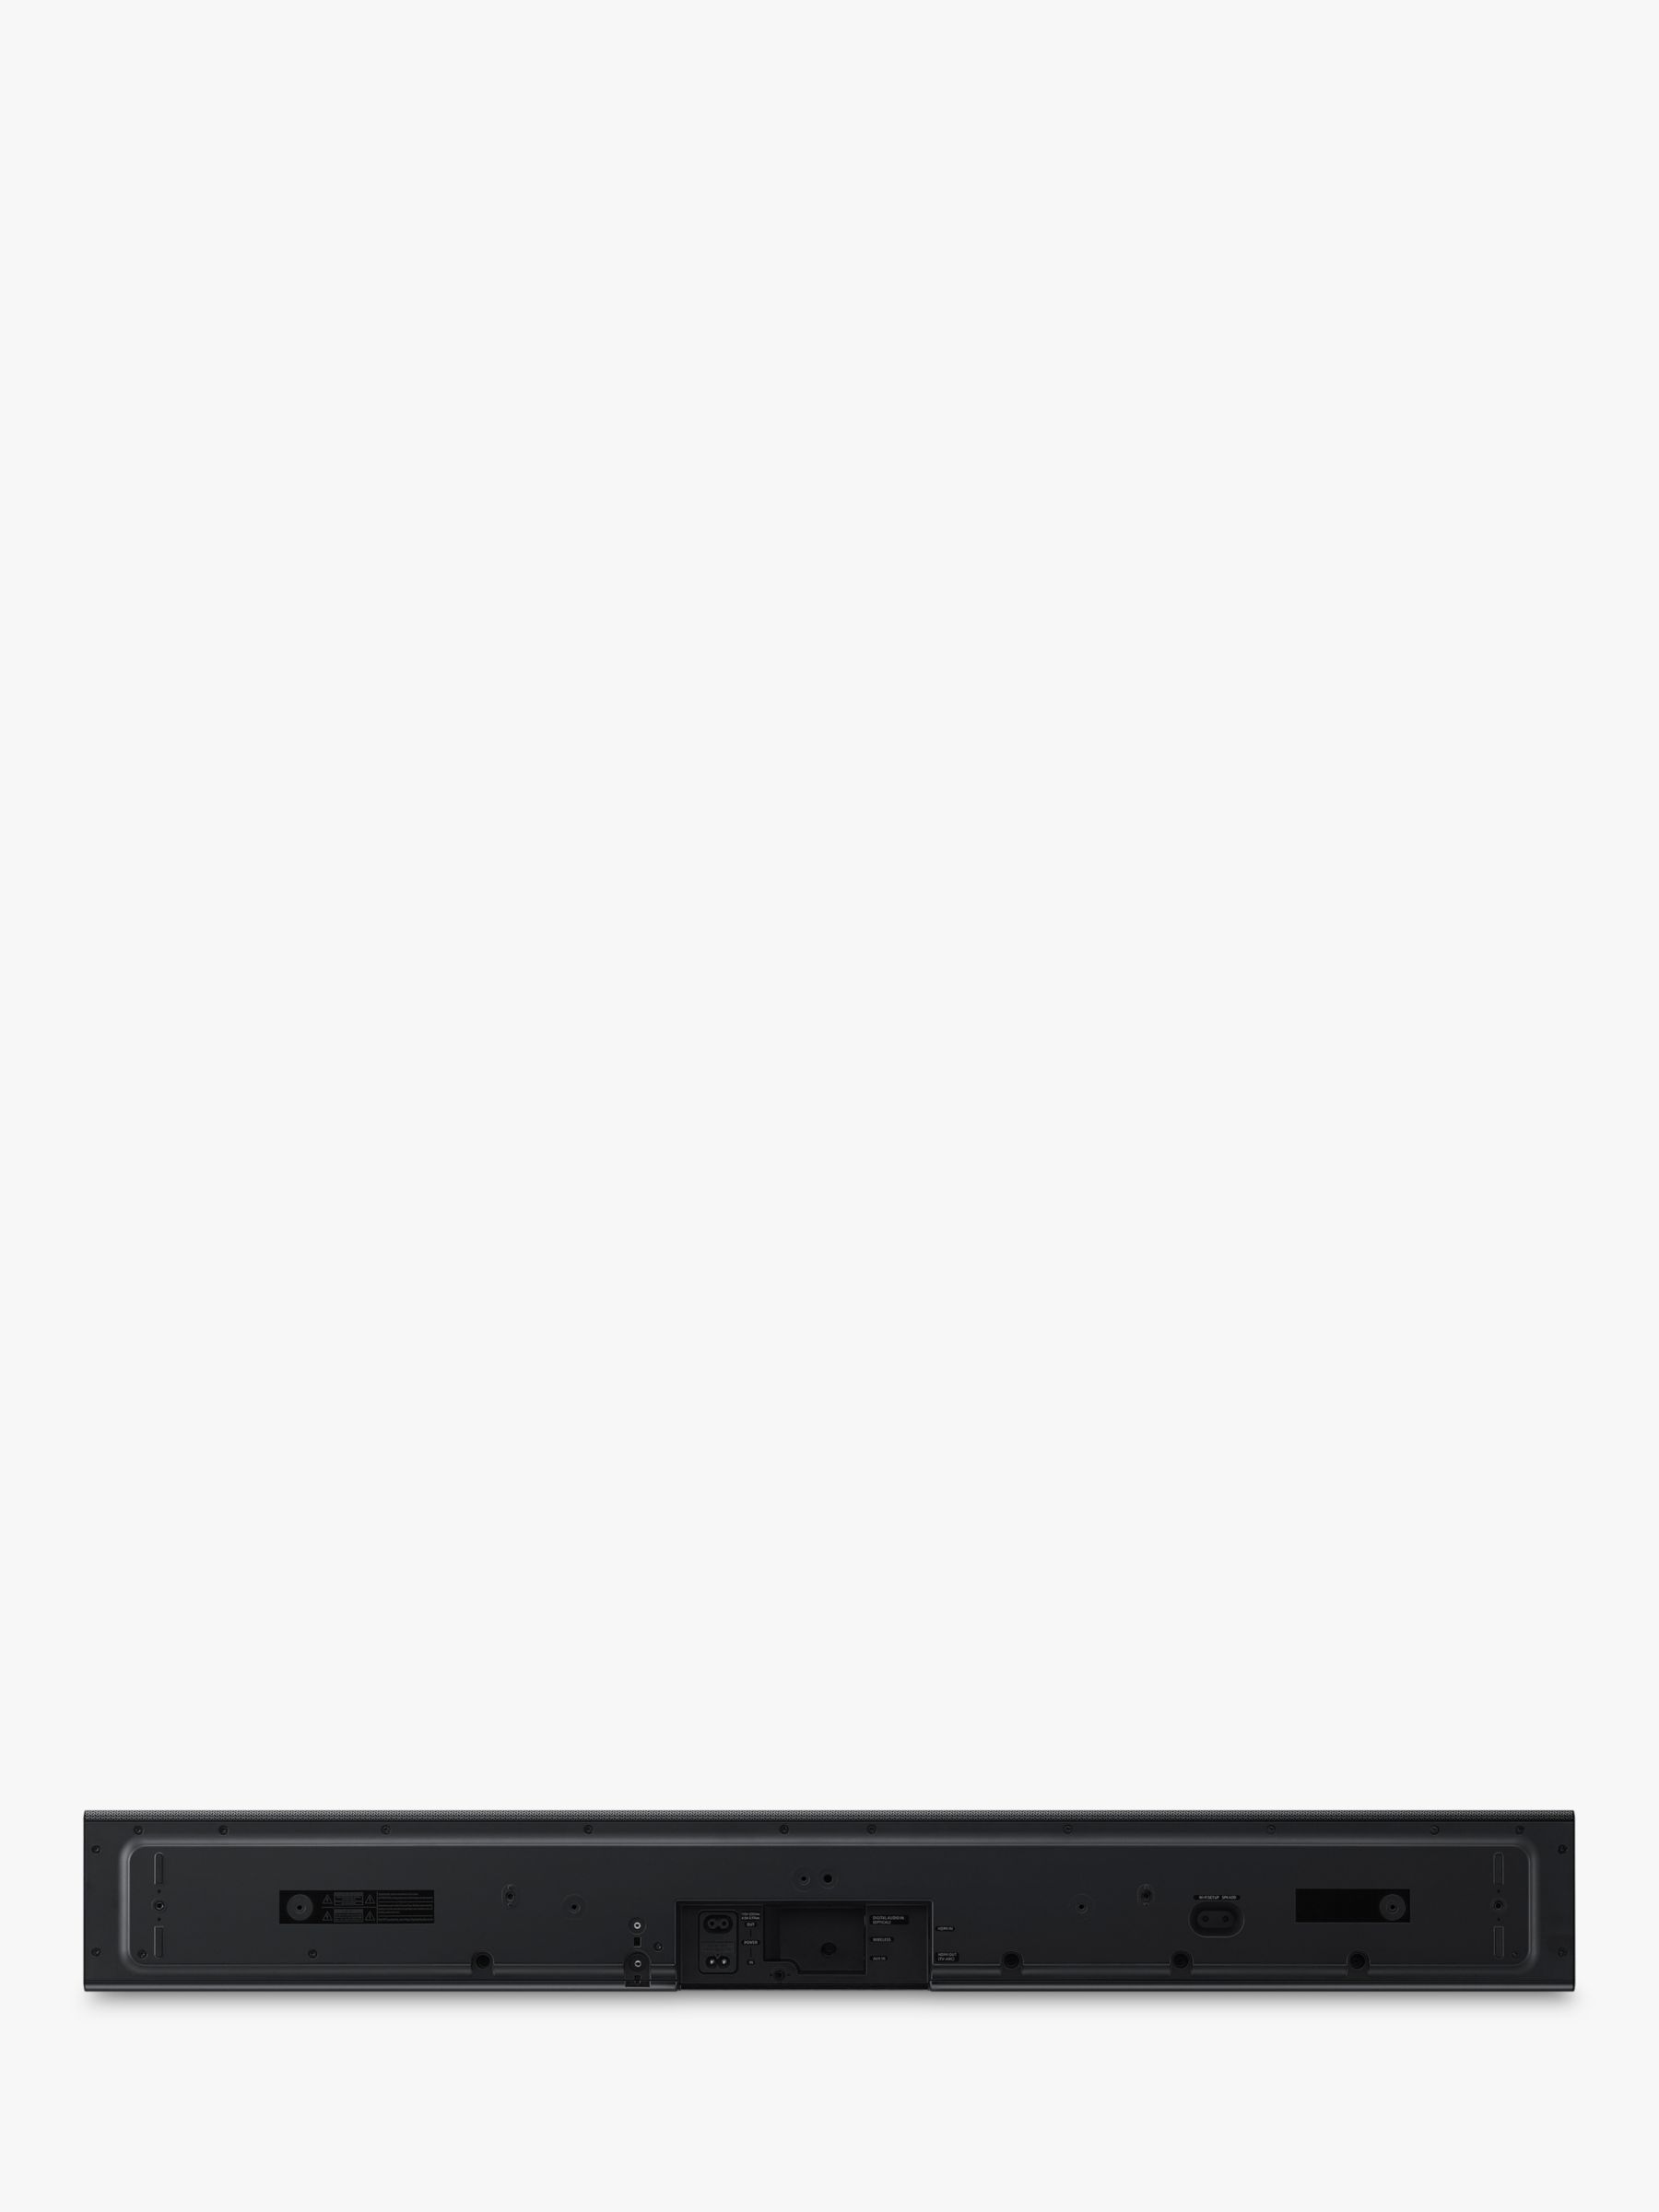 samsung ms650 connect to wifi